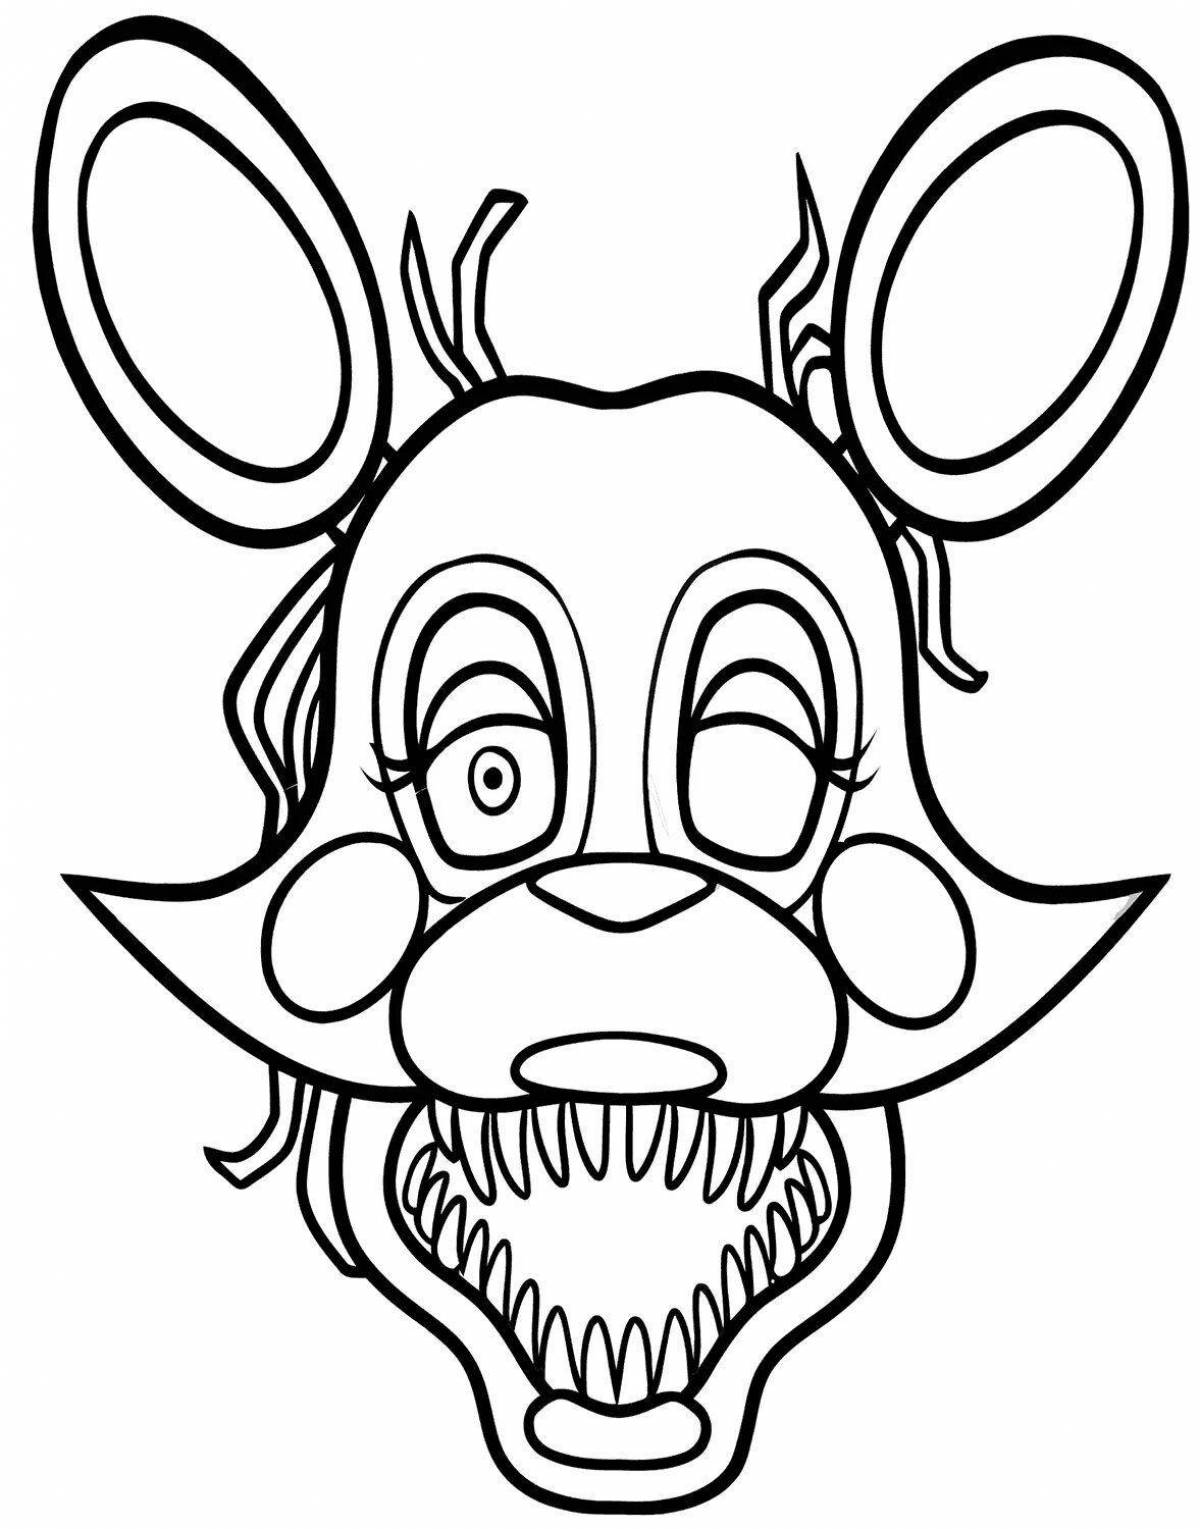 Bonnie's wild mask coloring page